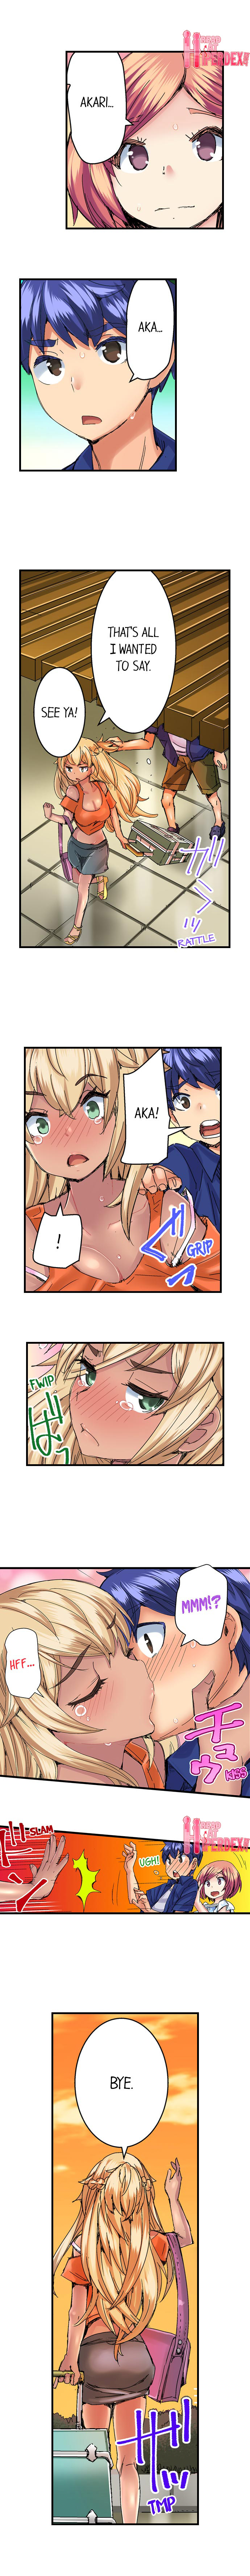 Taking a Hot Tanned Chick’s Virginity - Chapter 39 Page 7